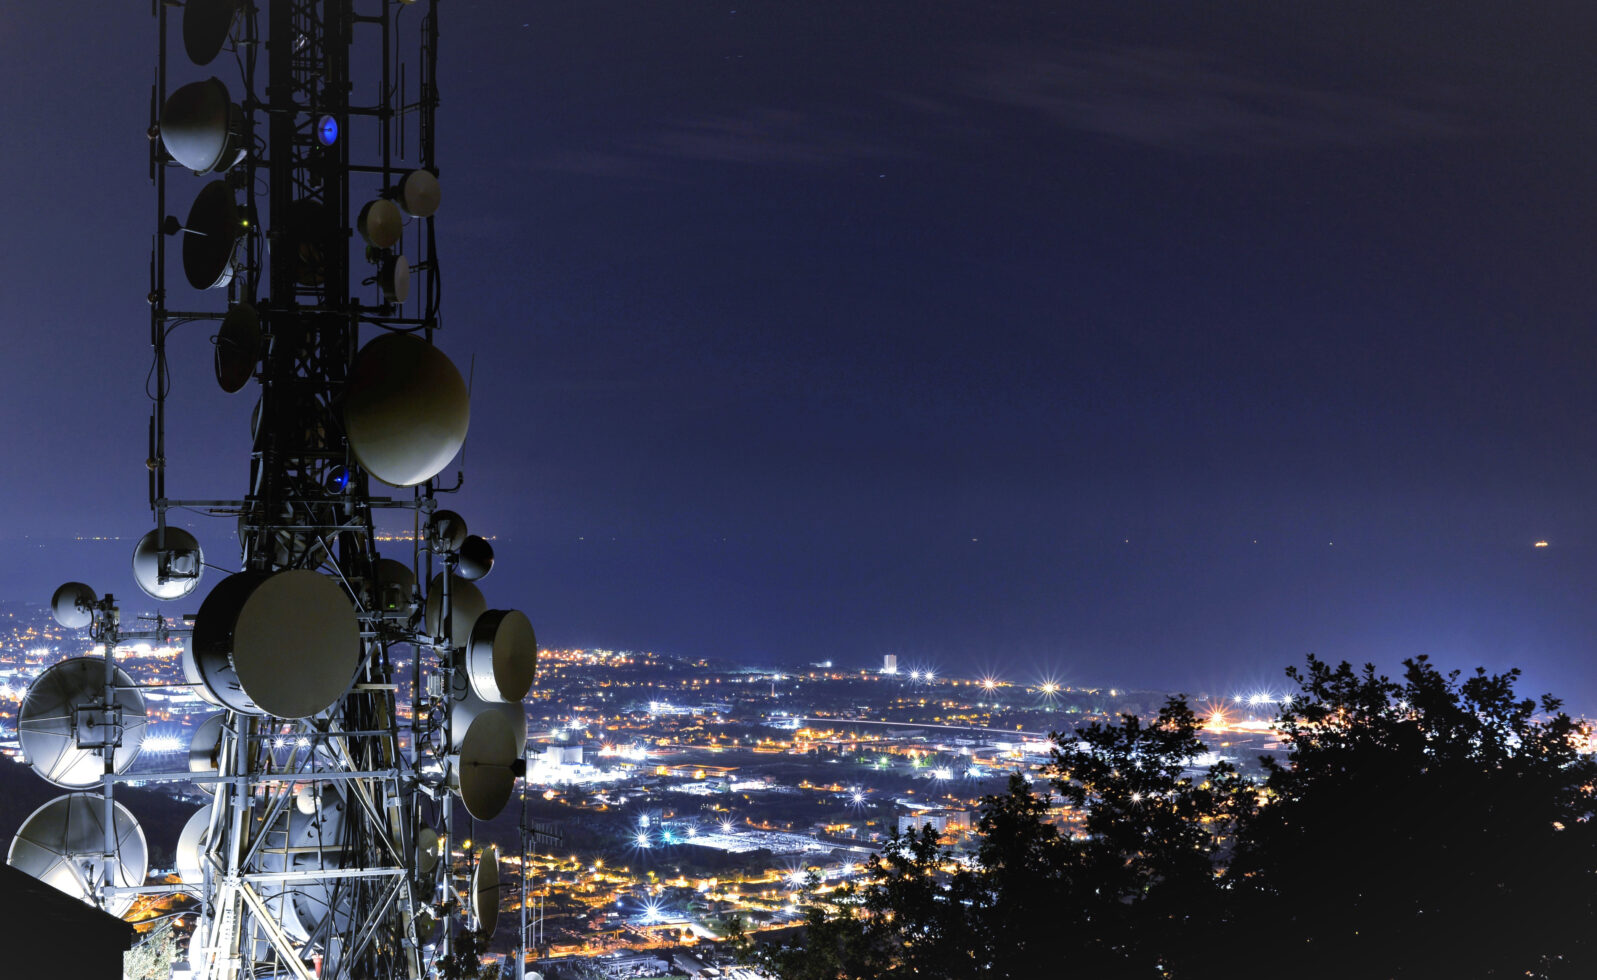 Telecommunications tower, antenna and satellite dish and city at night as background